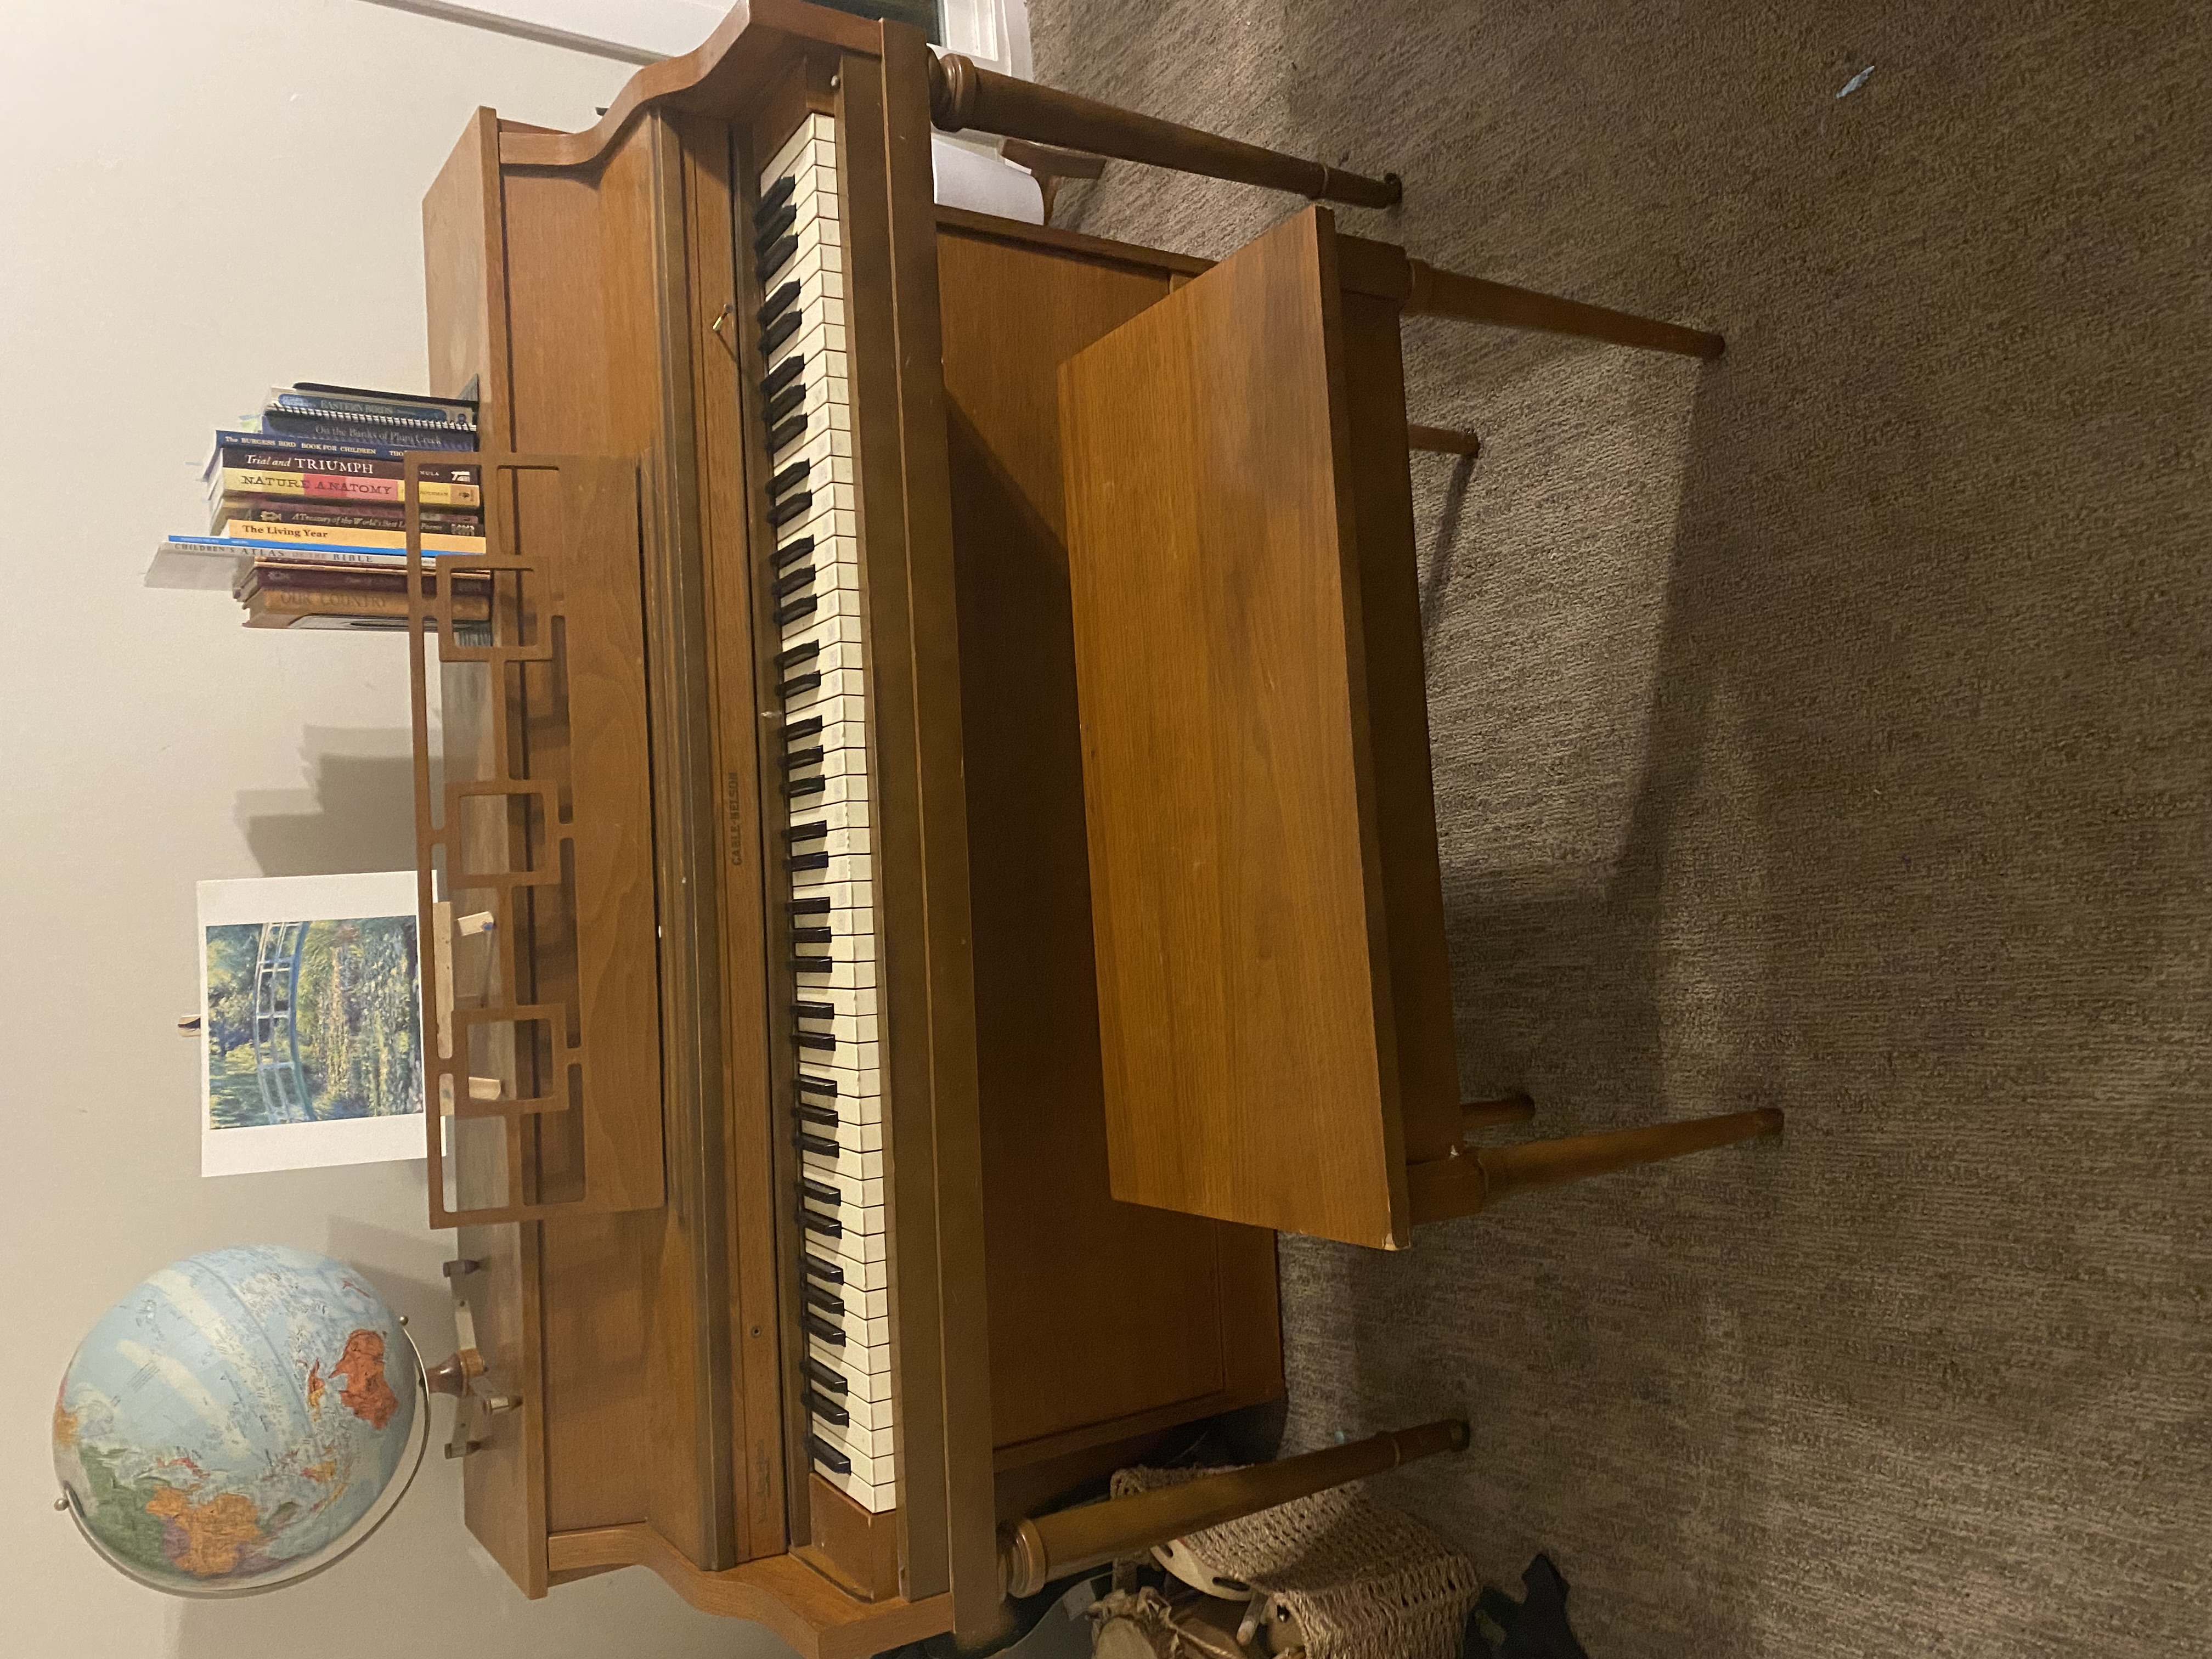 Cleveland area piano for sale 